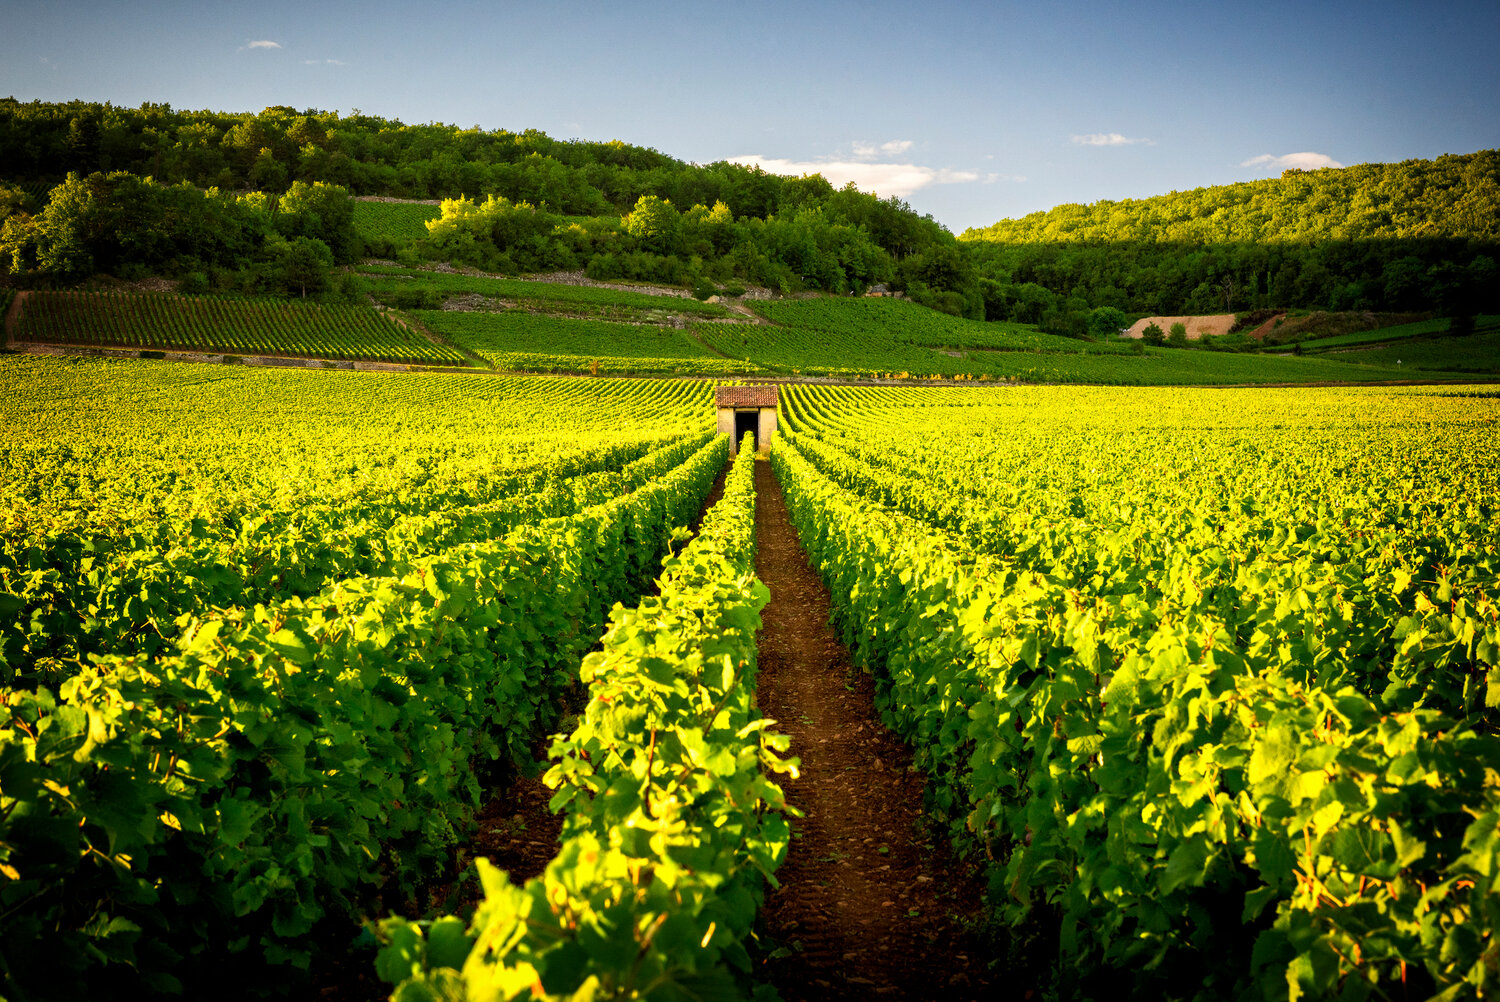 The villages of Burgundy are located in either the Côte de Nuits or the Côte de Beaune, and are home to some of the most famous vineyards in the world.